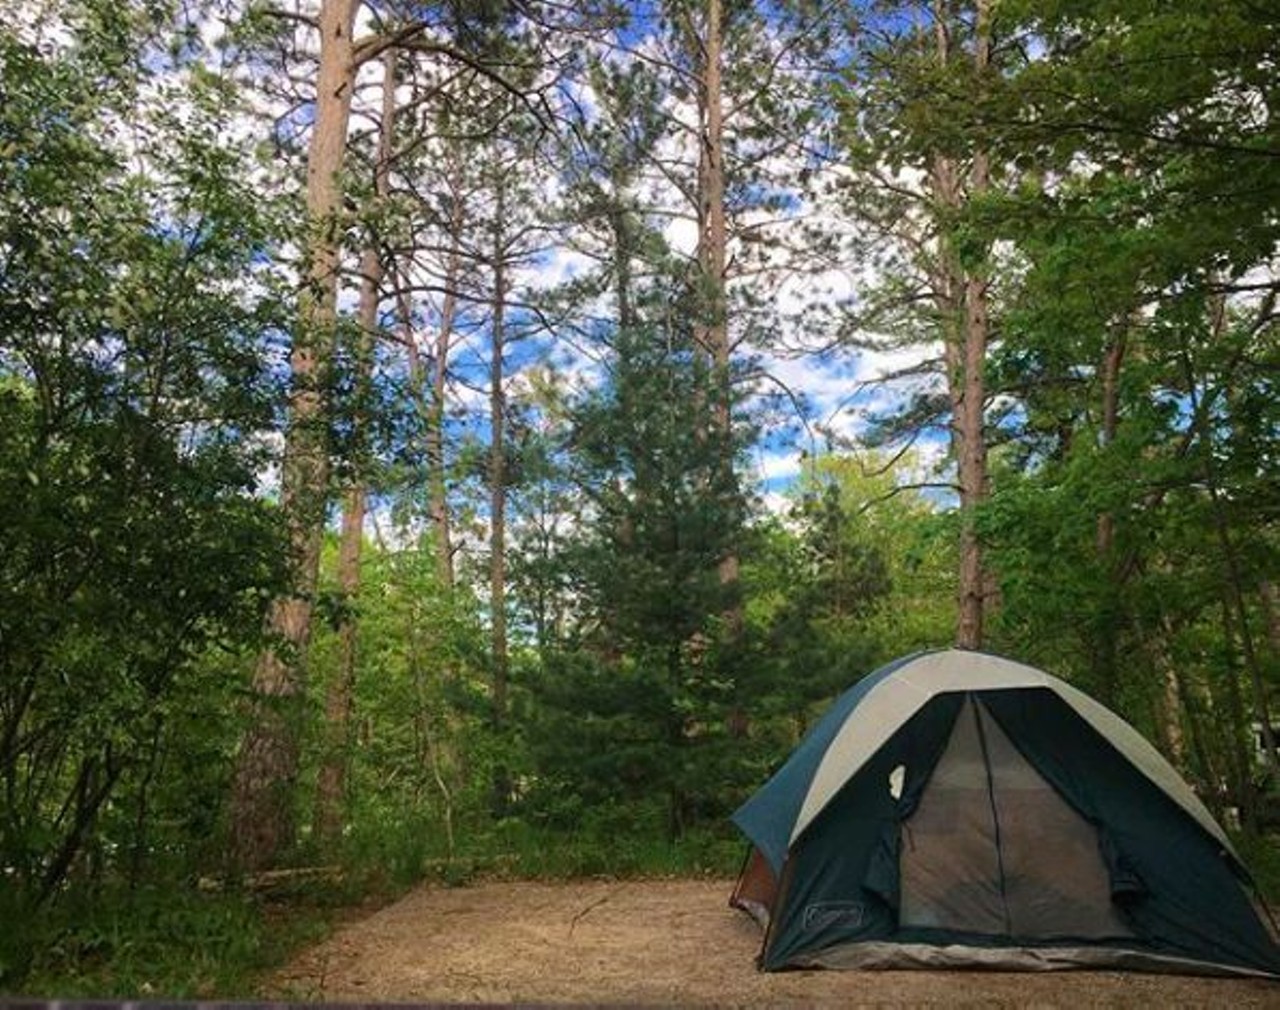 D.H. Day Campground
Glen Arbor,MI
This smaller campground is located in the heart of the Sleeping Bear Dunes National Lakeshore. If you are looking for a rustic, peaceful getaway, this is the place to go. It is even close to the Pierce Stocking Scenic Drive, Dune Climb and beautiful Lake Michigan. 
Photo via IG user @liiindseyh